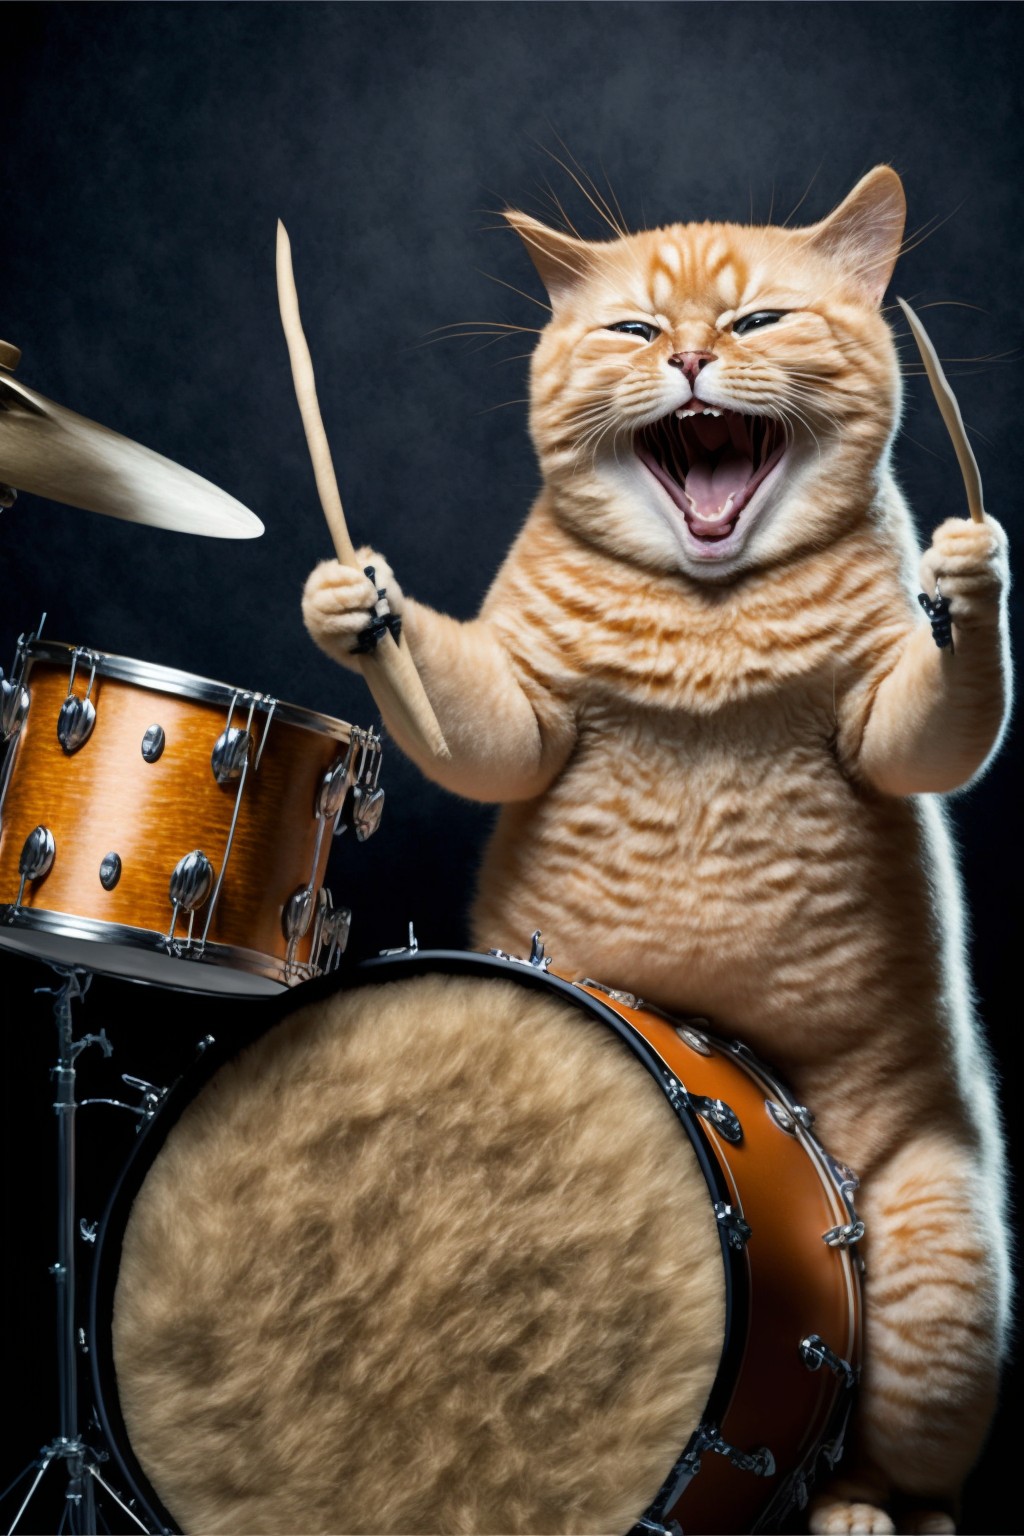 8 images of a grumpy cat drummer by Midjourney